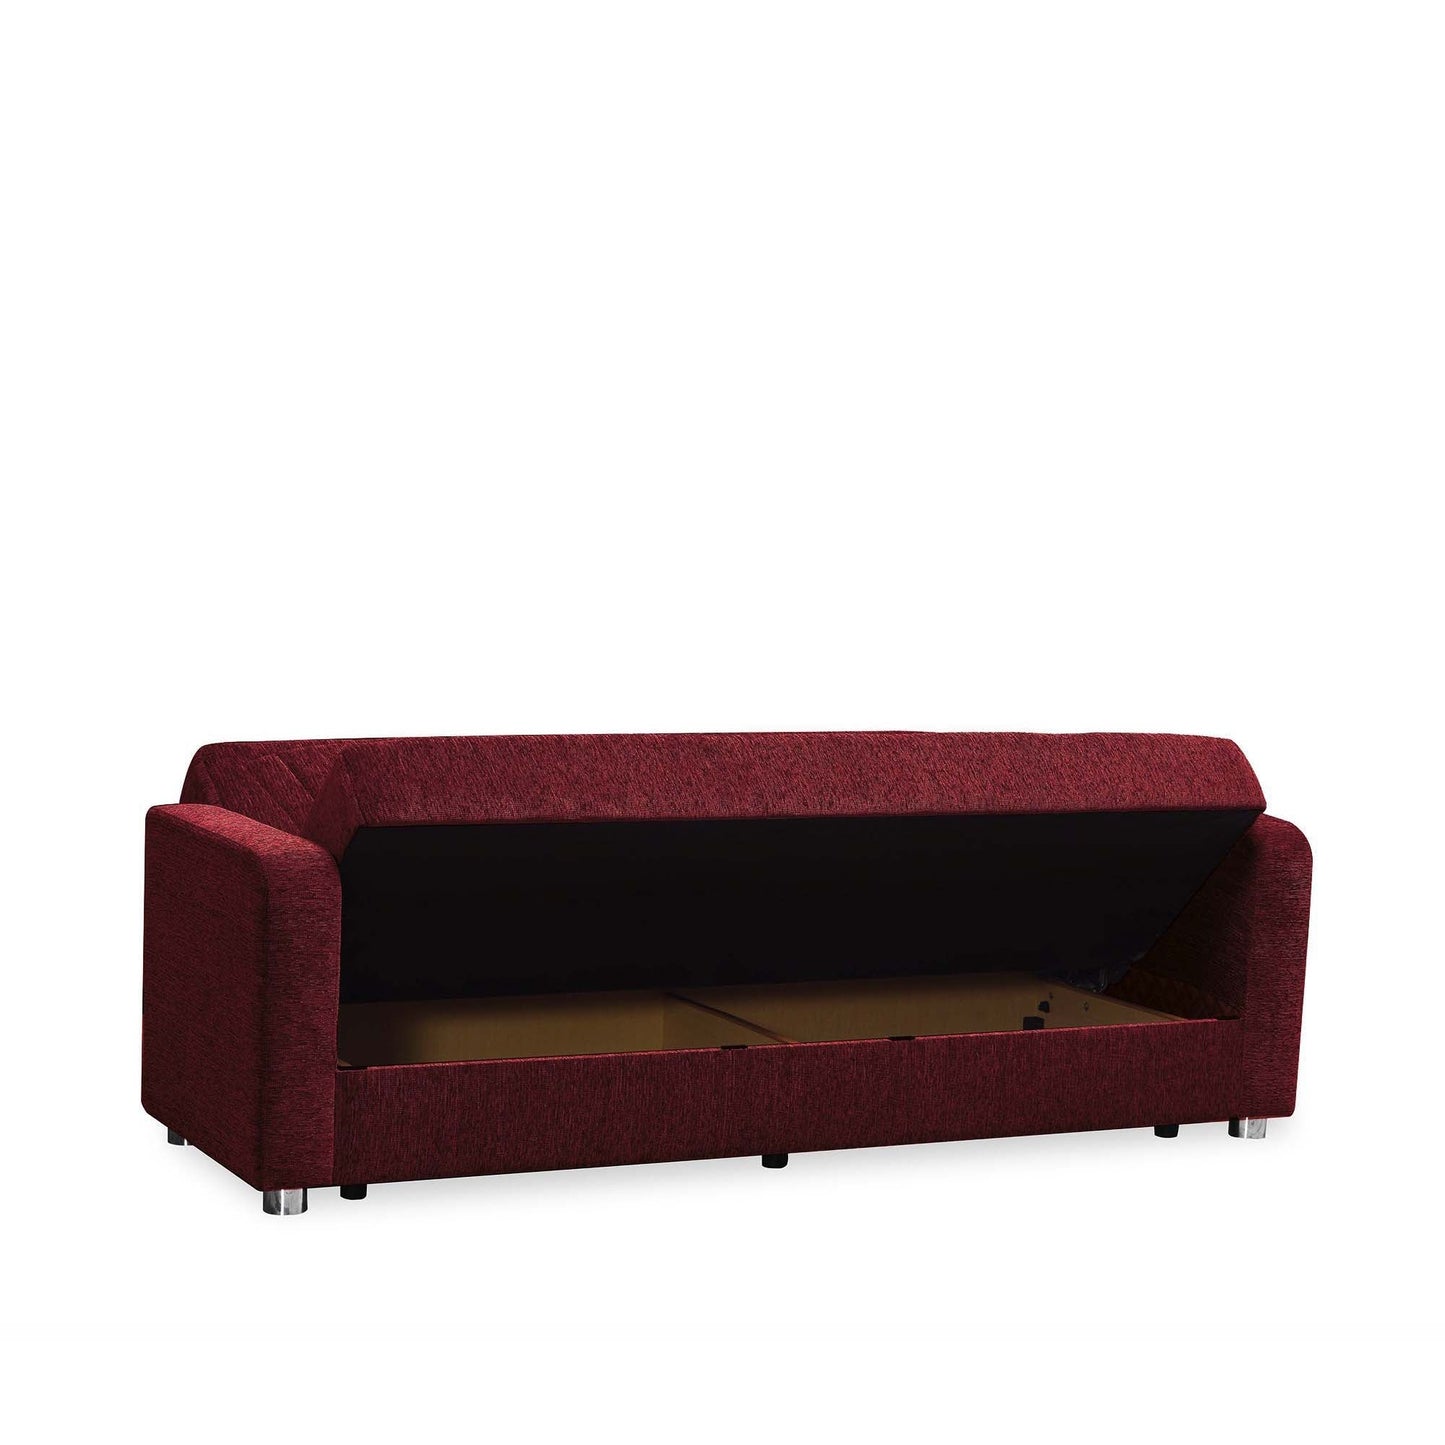 Elegance Upholstered Convertible Sofabed with Storage Red